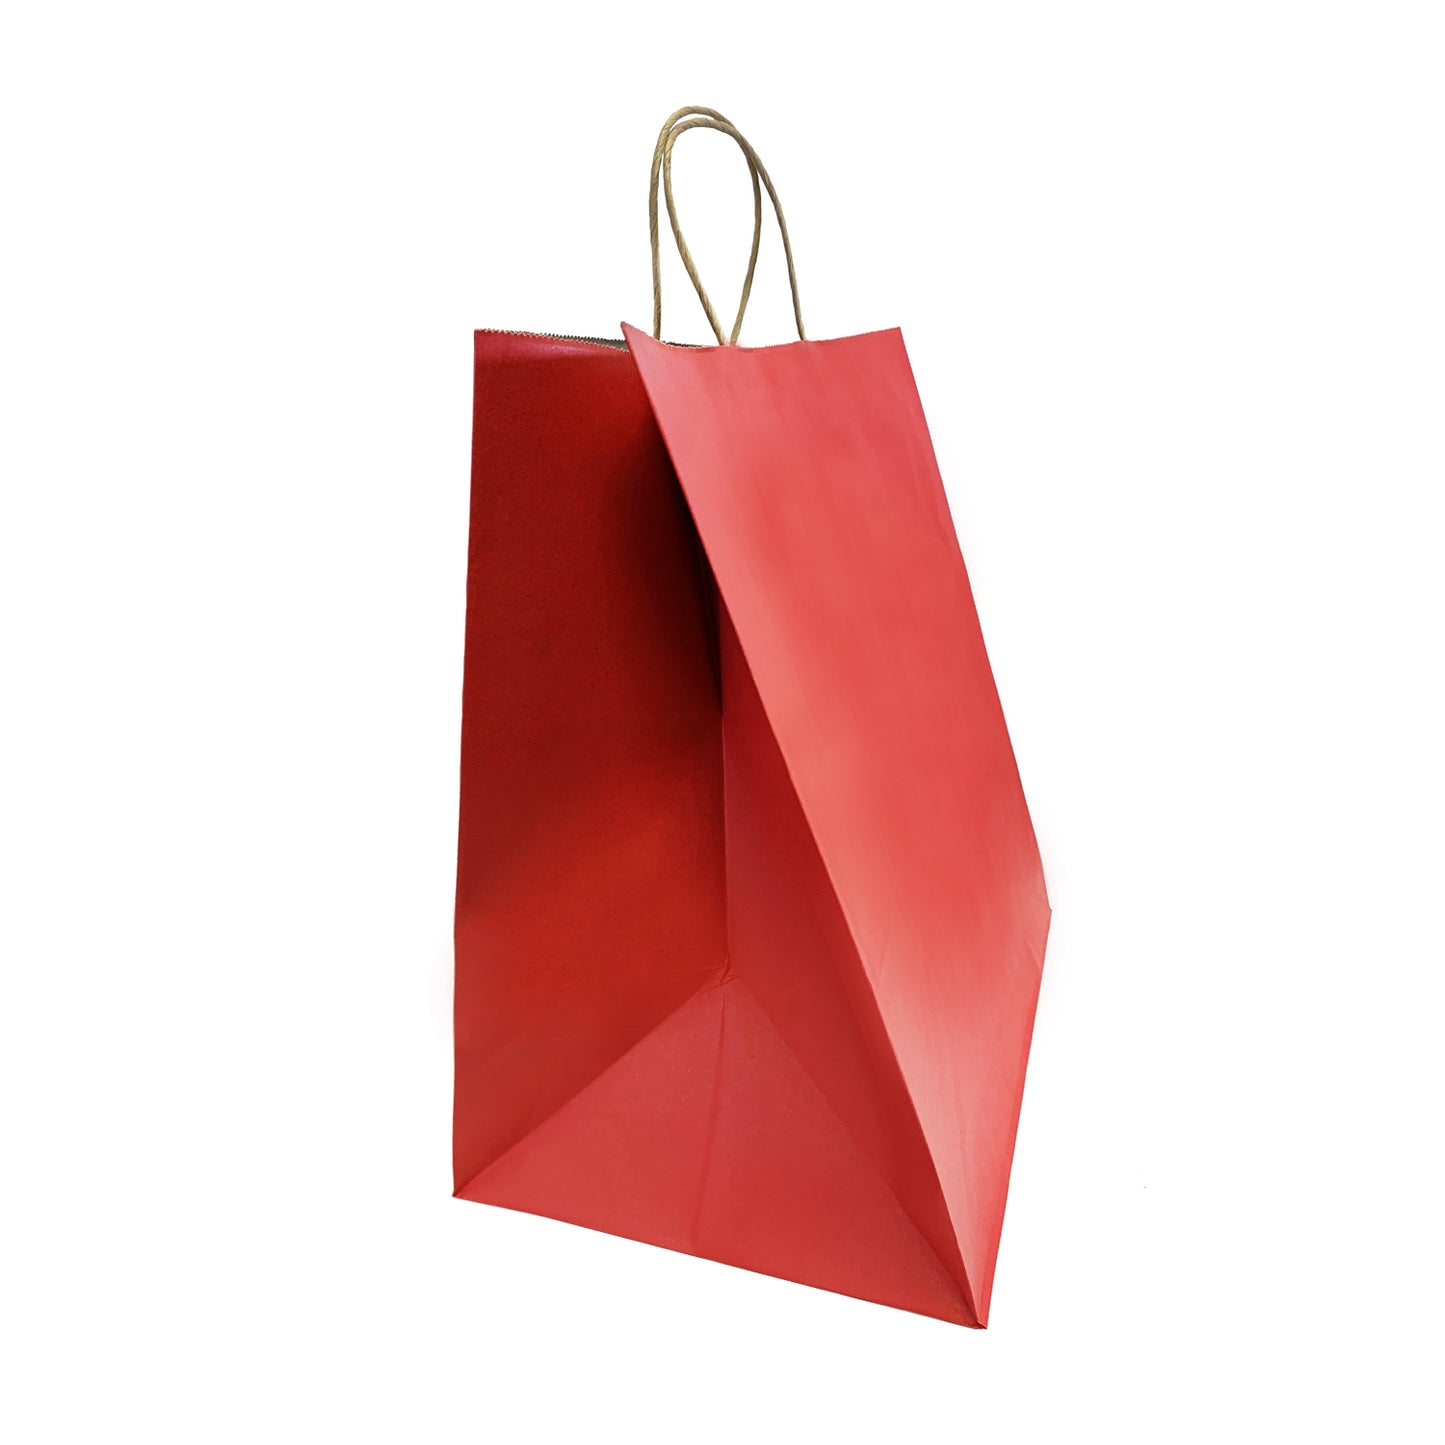 200 Pcs, Super Royal,  14x10x15.75 inches, Red Kraft Paper Bags, with Twisted handle